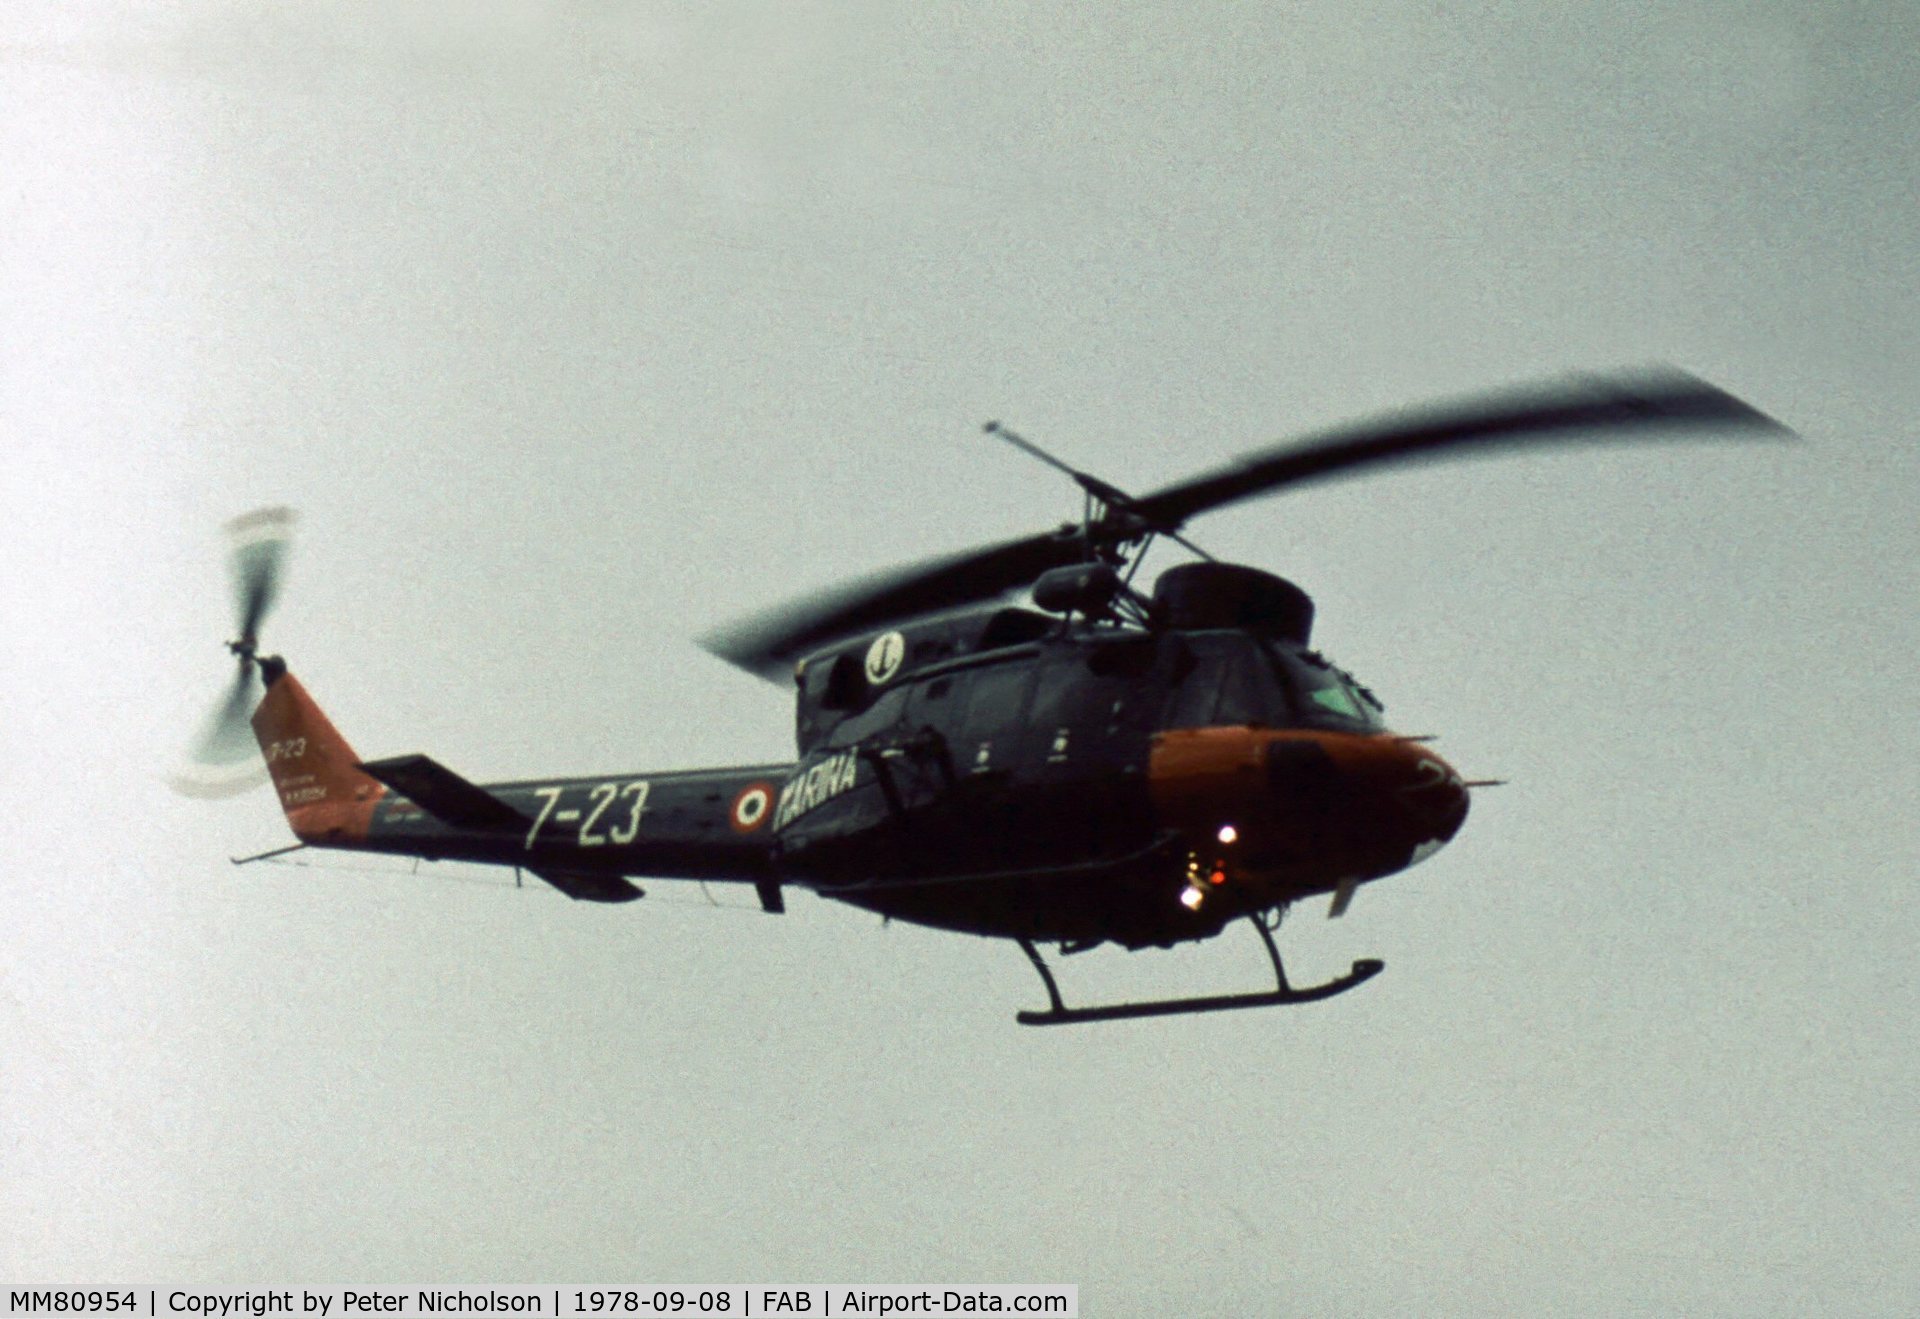 MM80954, Agusta AB-212 ASW C/N 5130, AB-212 of the Italian Navy was demonstrated at the 1978 Farnborough Airshow.